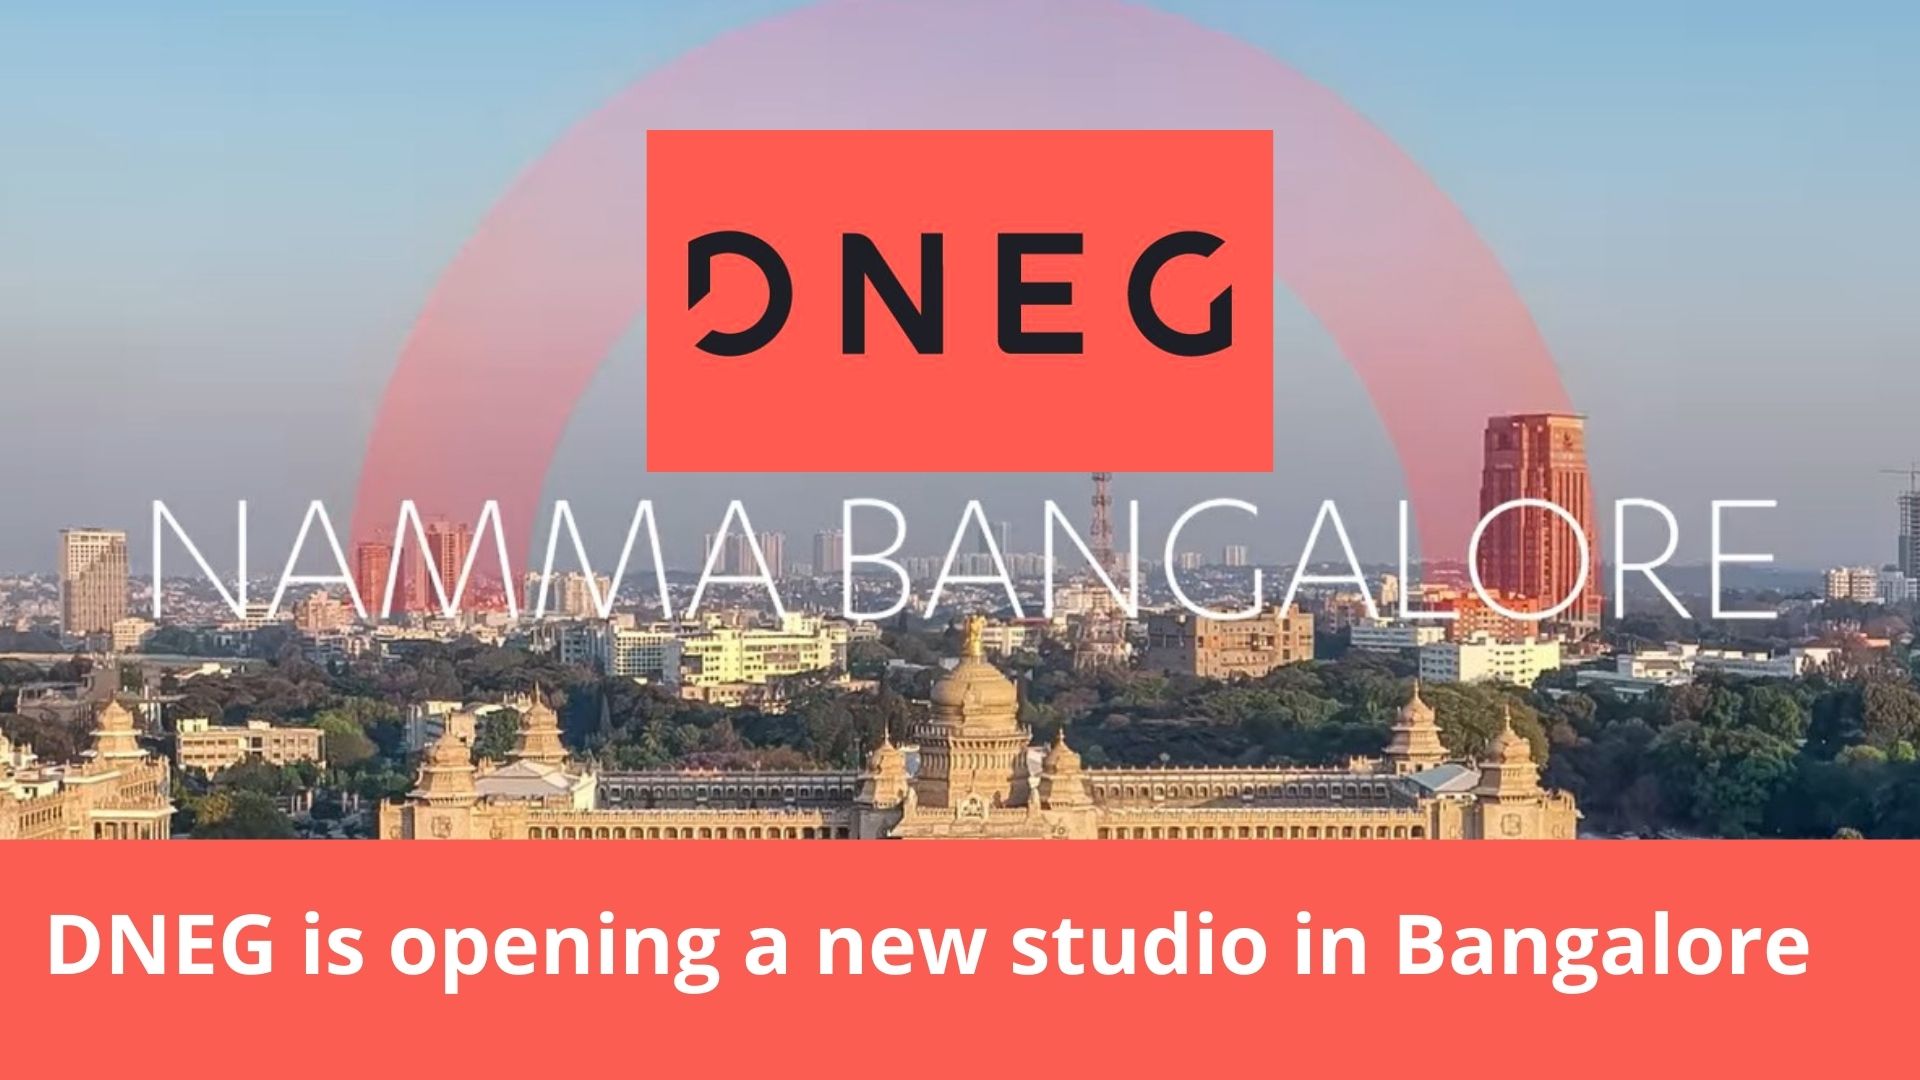 DNEG is opening a new studio in Bangalore - vfxexpress